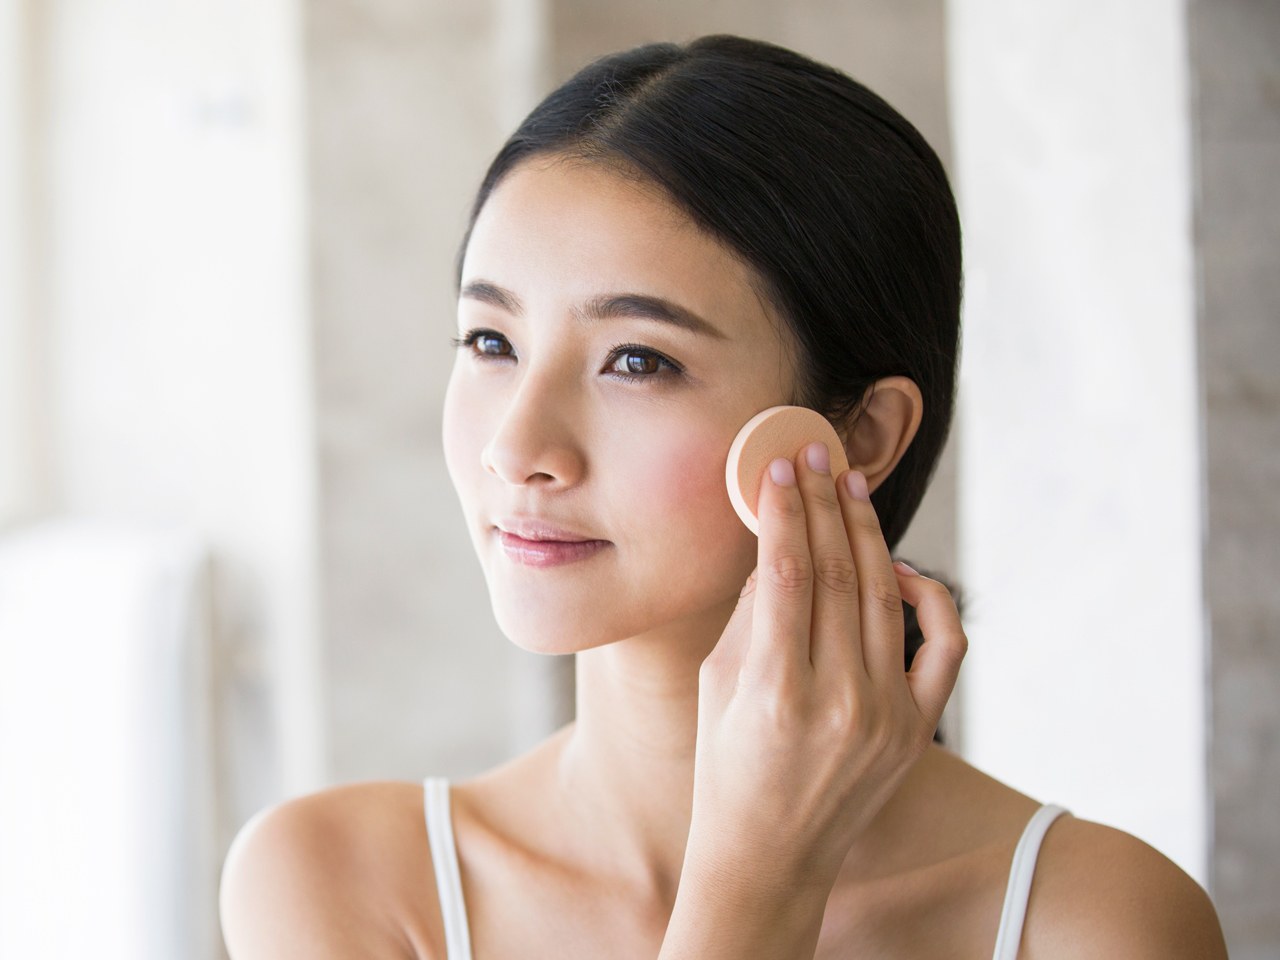 7 most effective ways to prepare skin for makeup #6